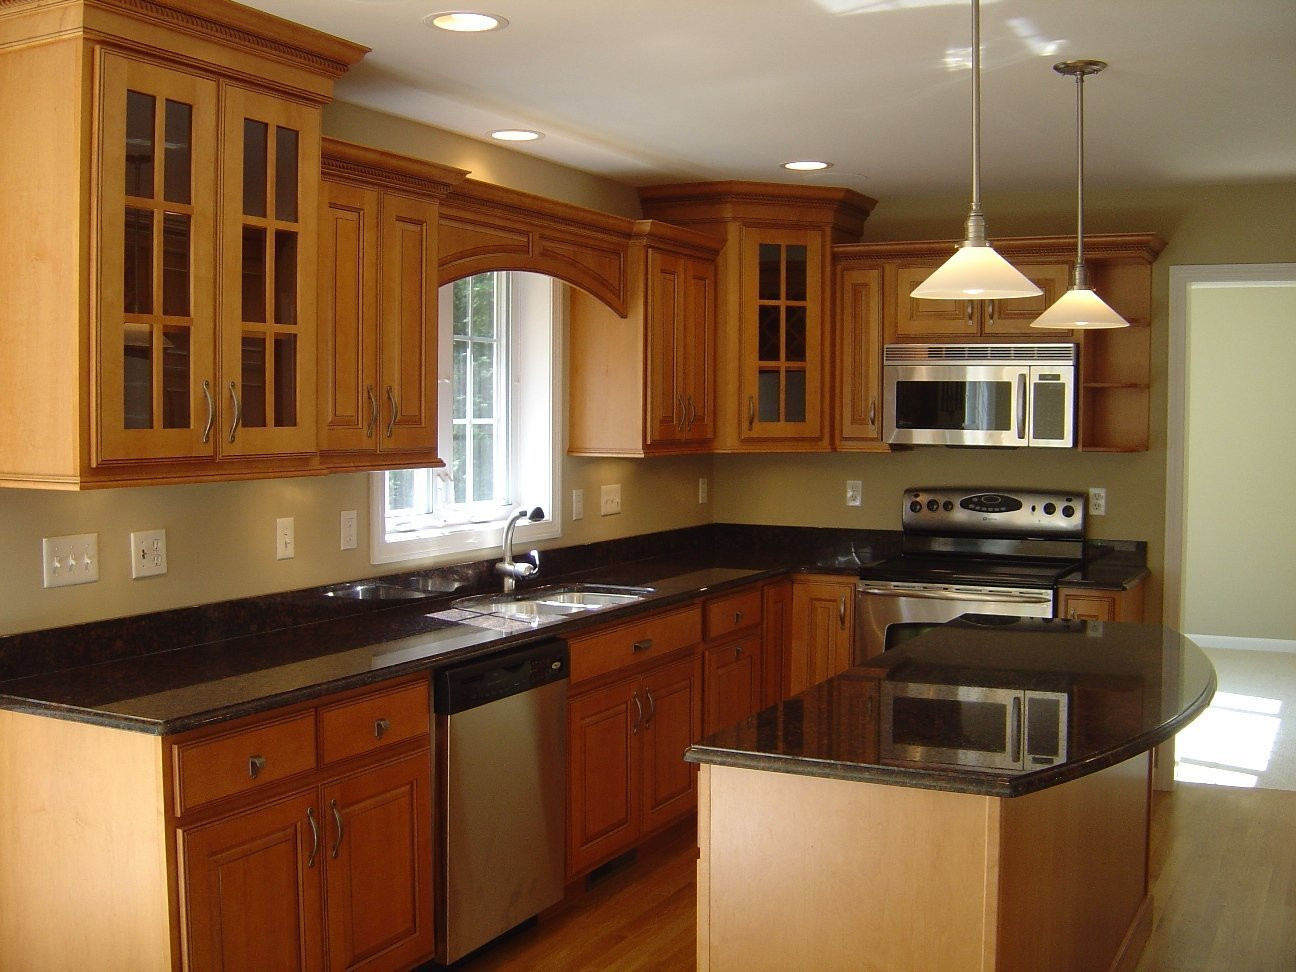 Kitchen Cabinet For Small Kitchen
 Kitchen Cabinet Colors for Small Kitchens Home Furniture